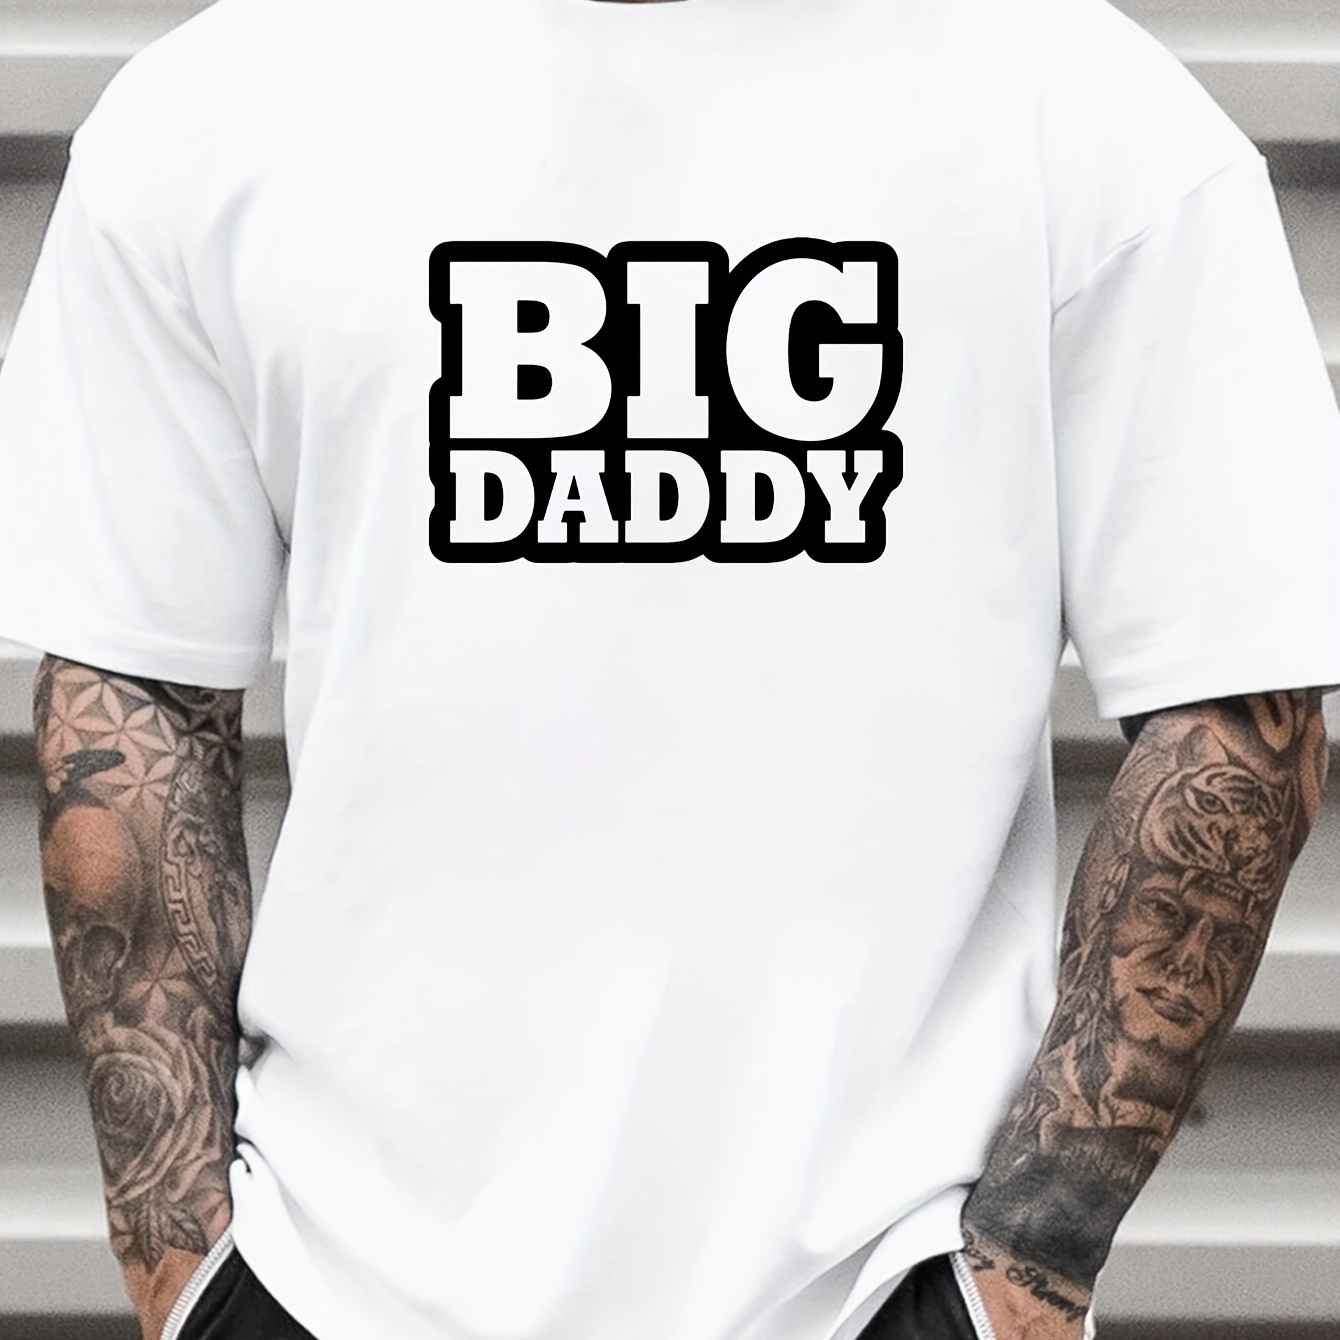 

Bid Daddy Creative Alphabet Print Crew Neck Short Sleeve T-shirt For Men, Casual Summer T-shirt For Daily Wear And Vacation Resorts